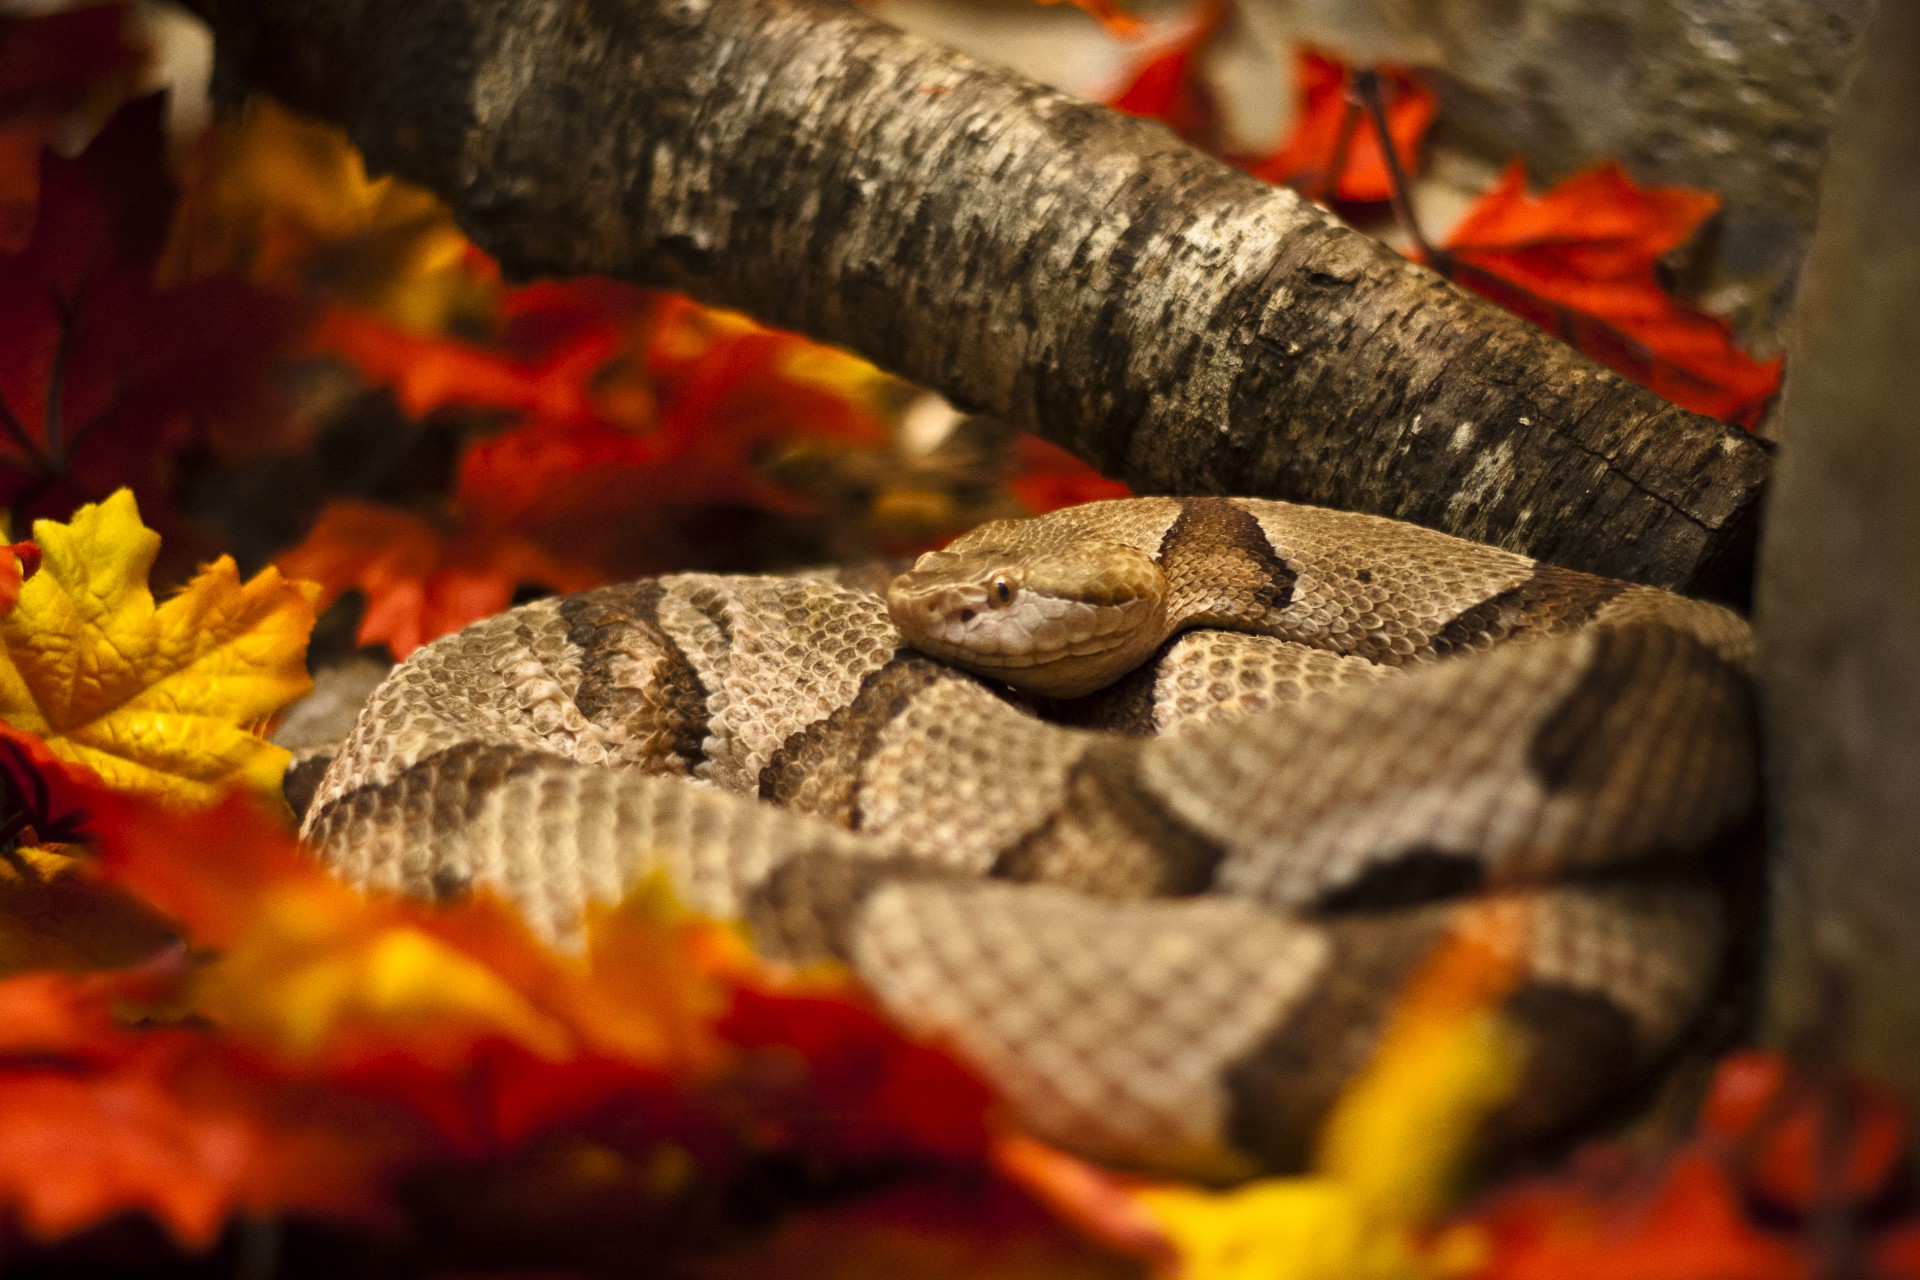 Snake waiting between branches and leaves